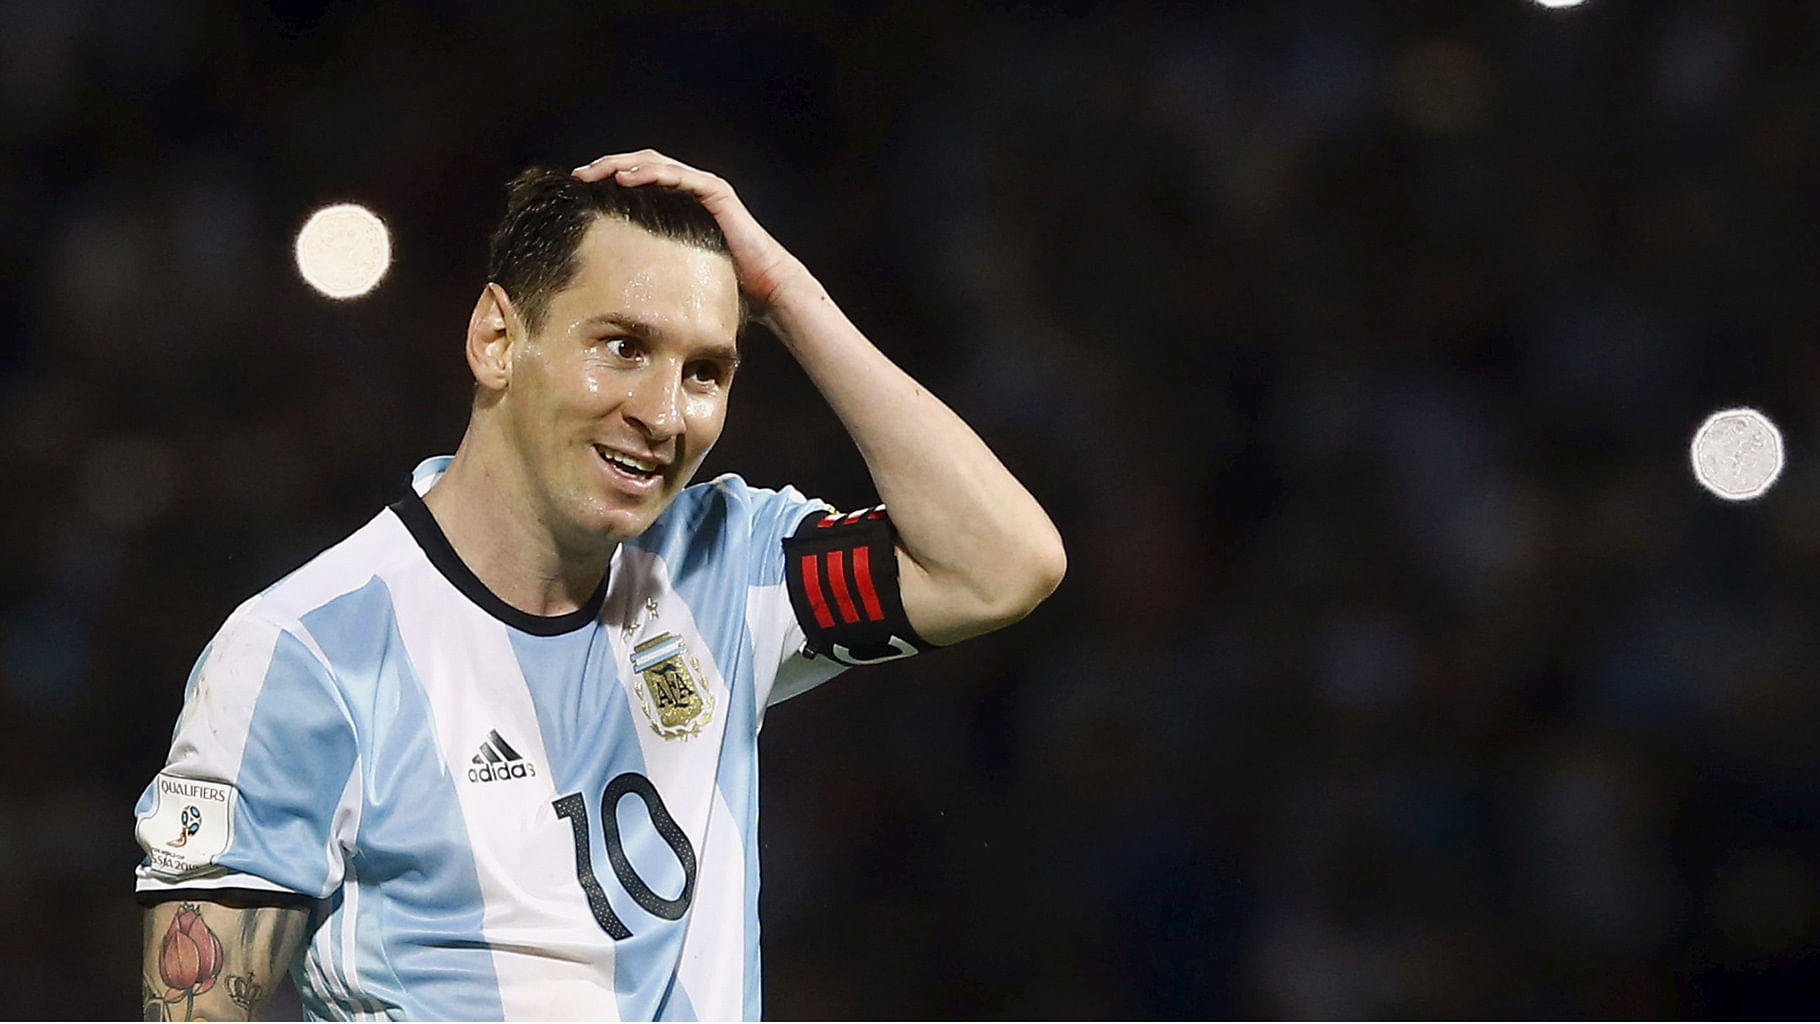 FIFA said Messi had “directed insulting words at an assistant referee” during the 1-0 win over Chile on Friday. (Photo: Reuters)